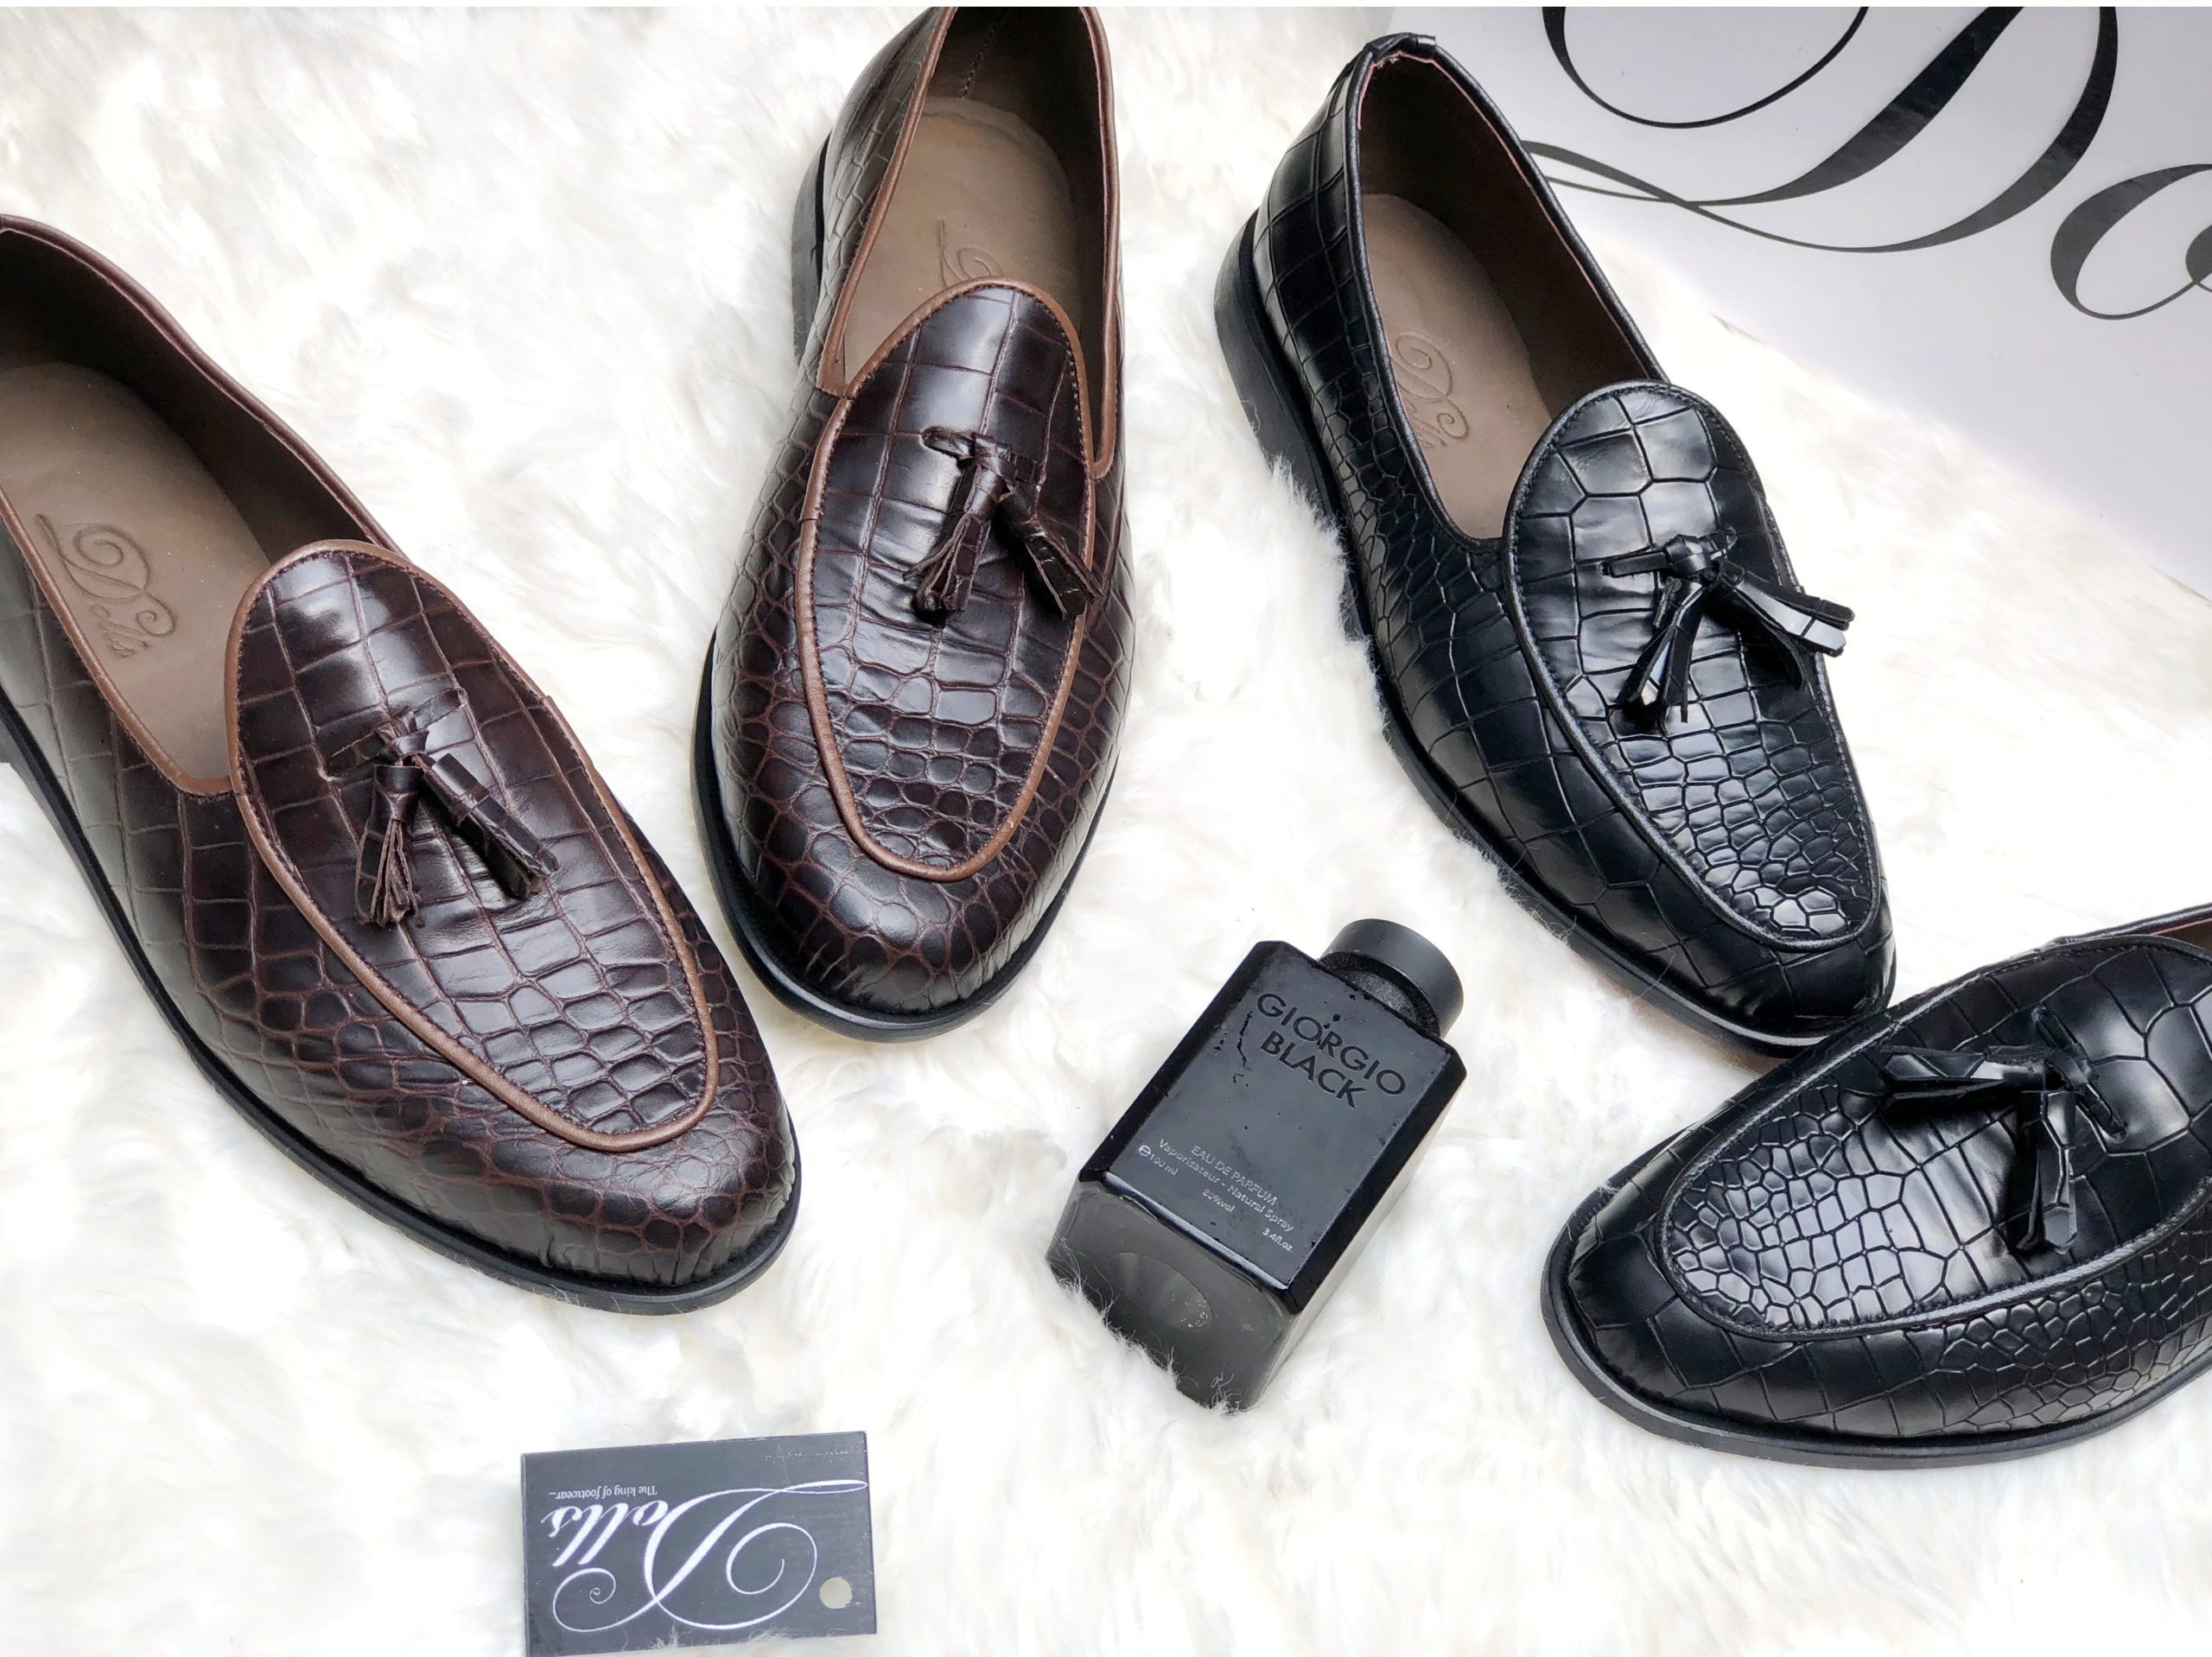 picture of an embossed crocodile leather shoes for men by Dolls leather products